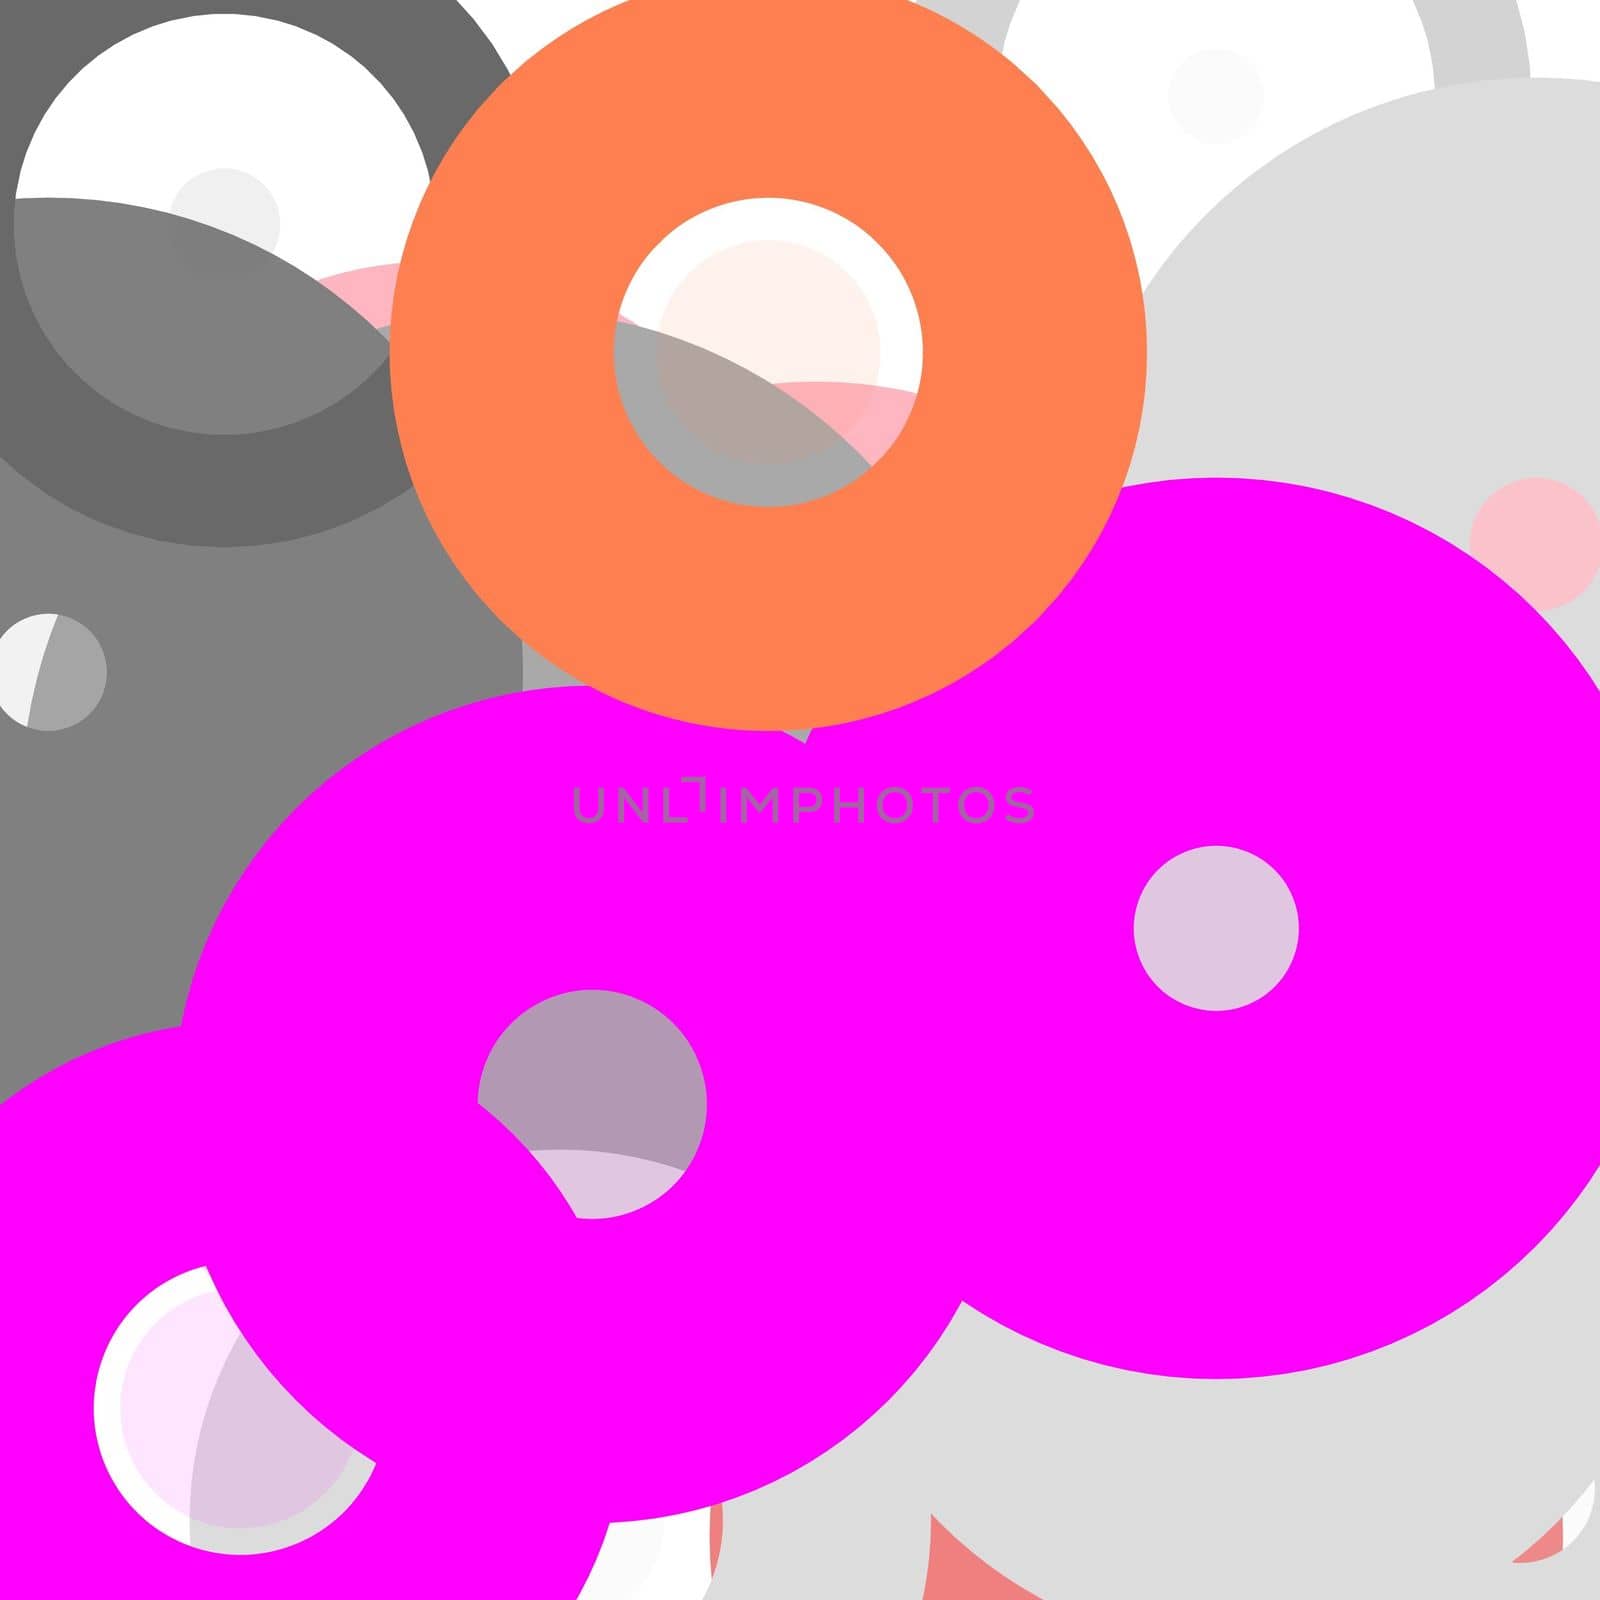 Abstract grey pink circles illustration background by claudiodivizia